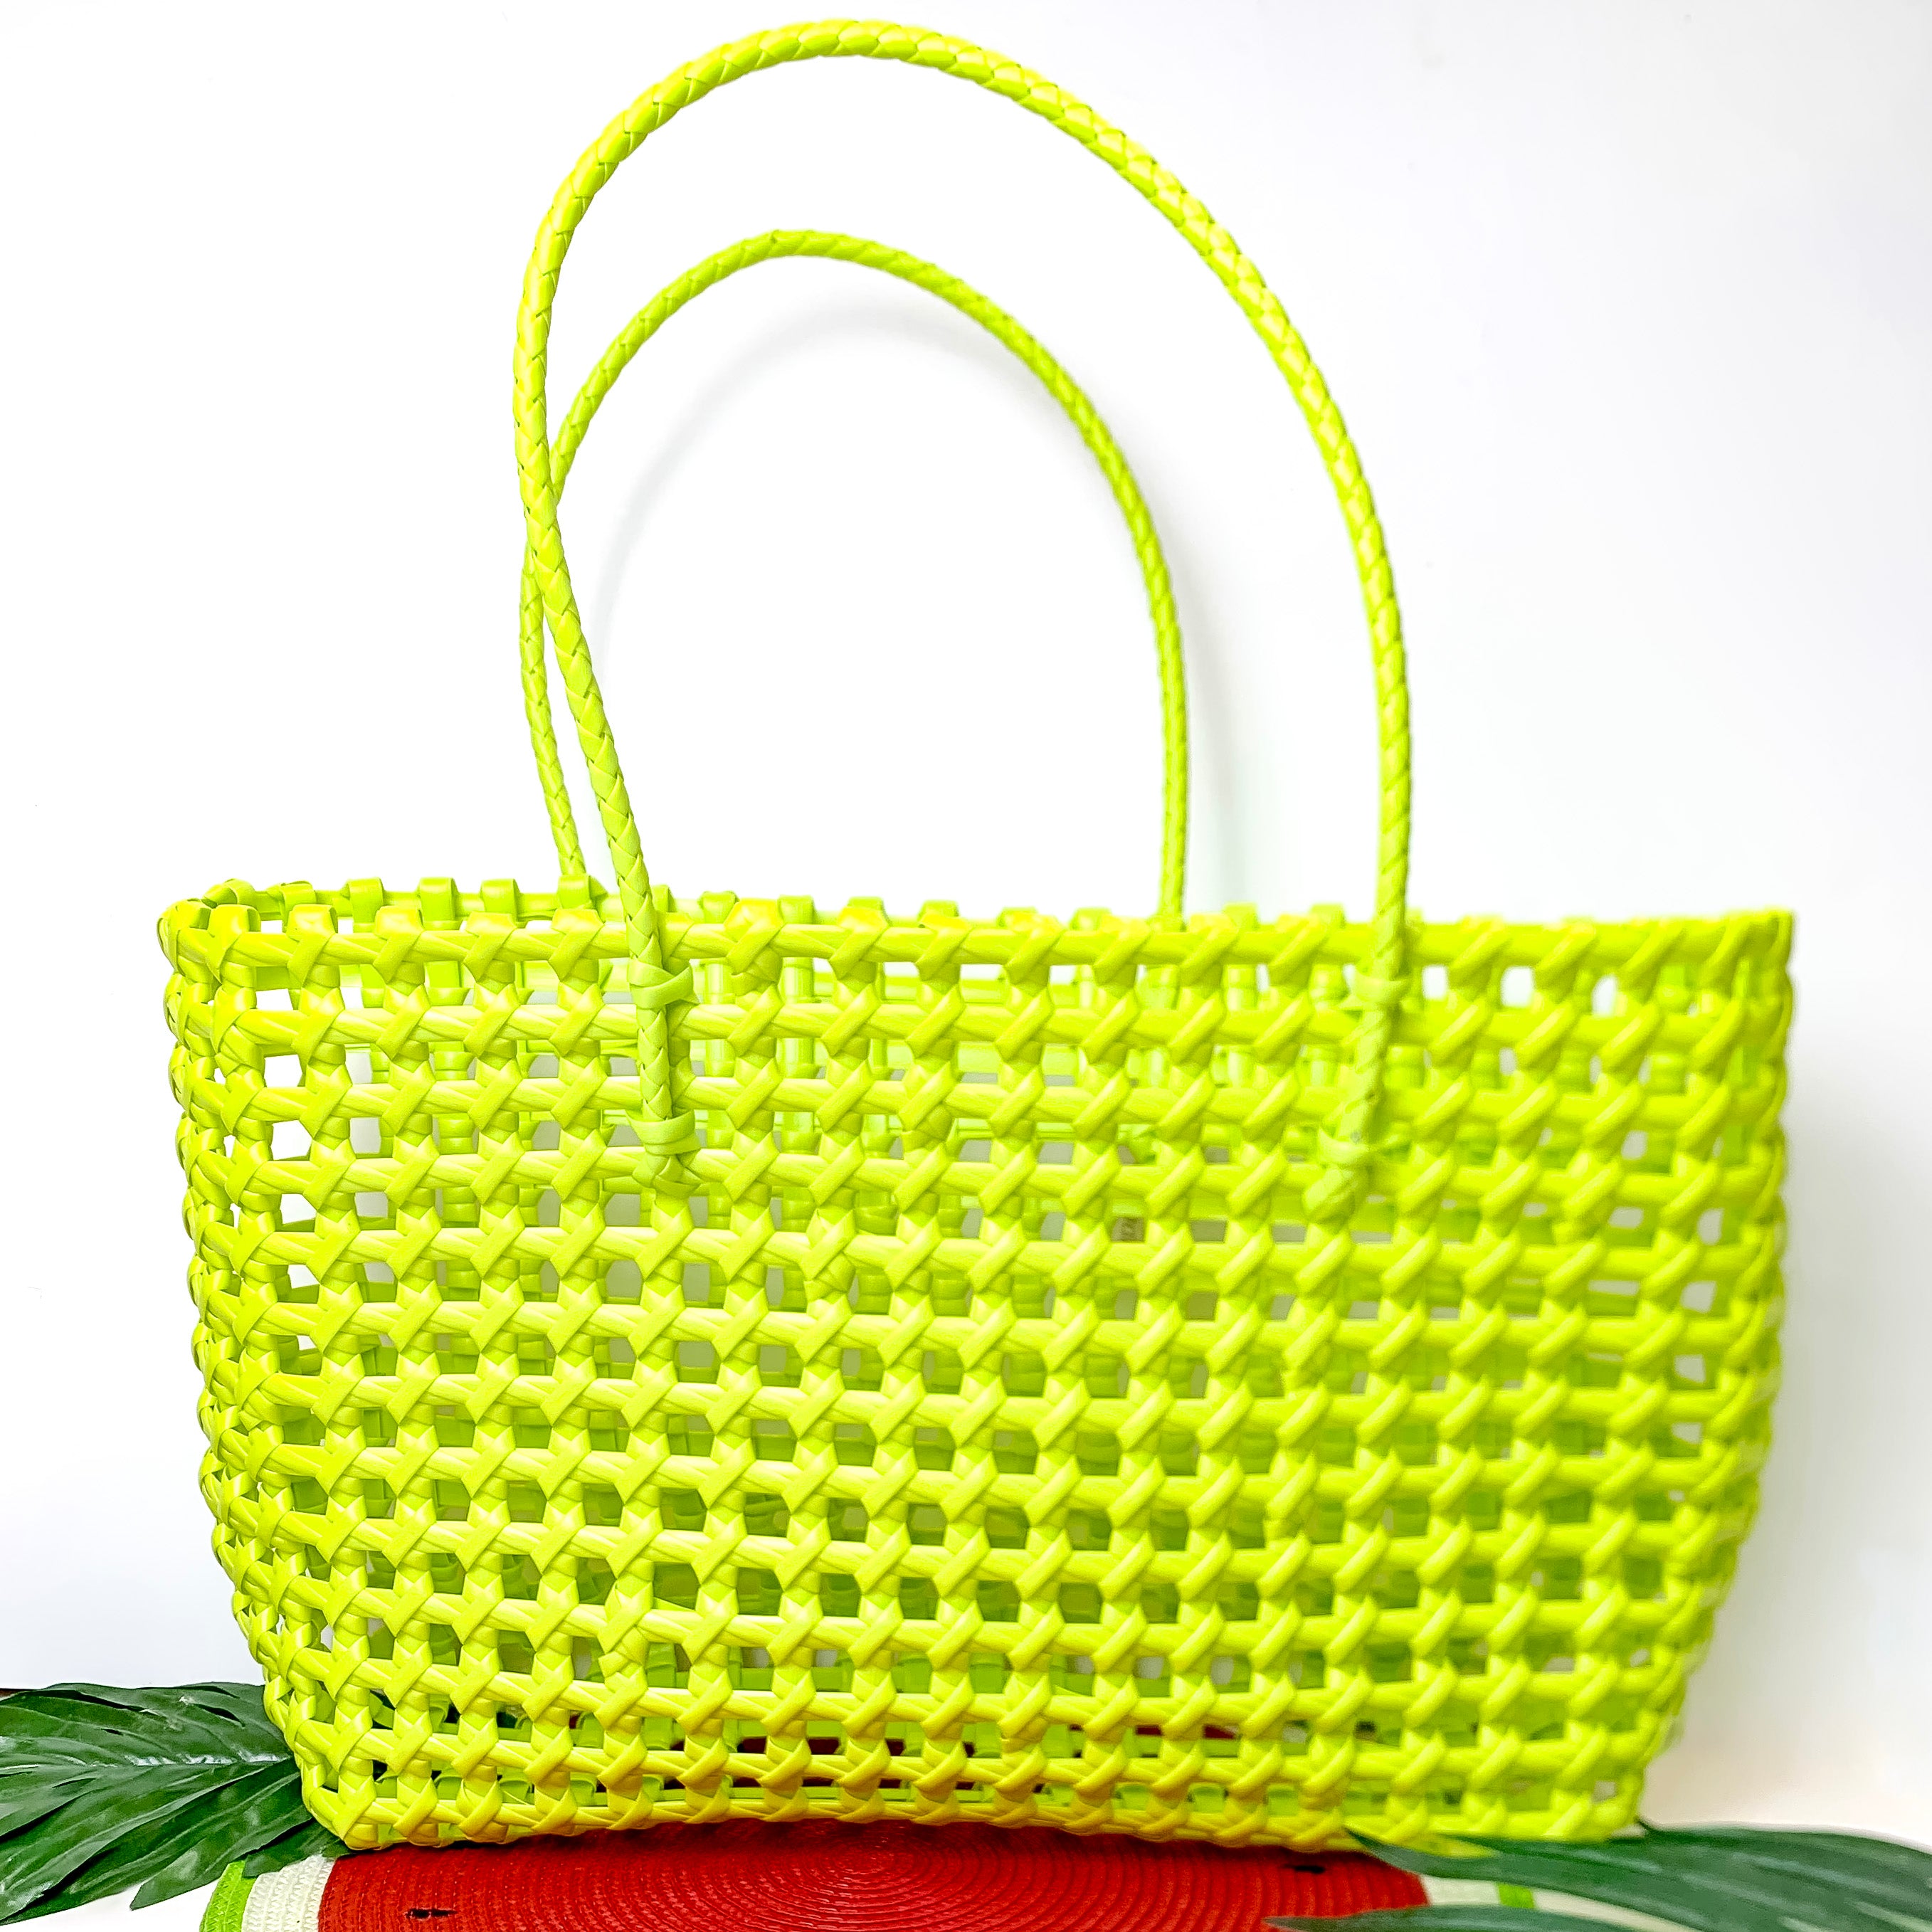 Beachy Brights Basket Tote Bag in Lime Green